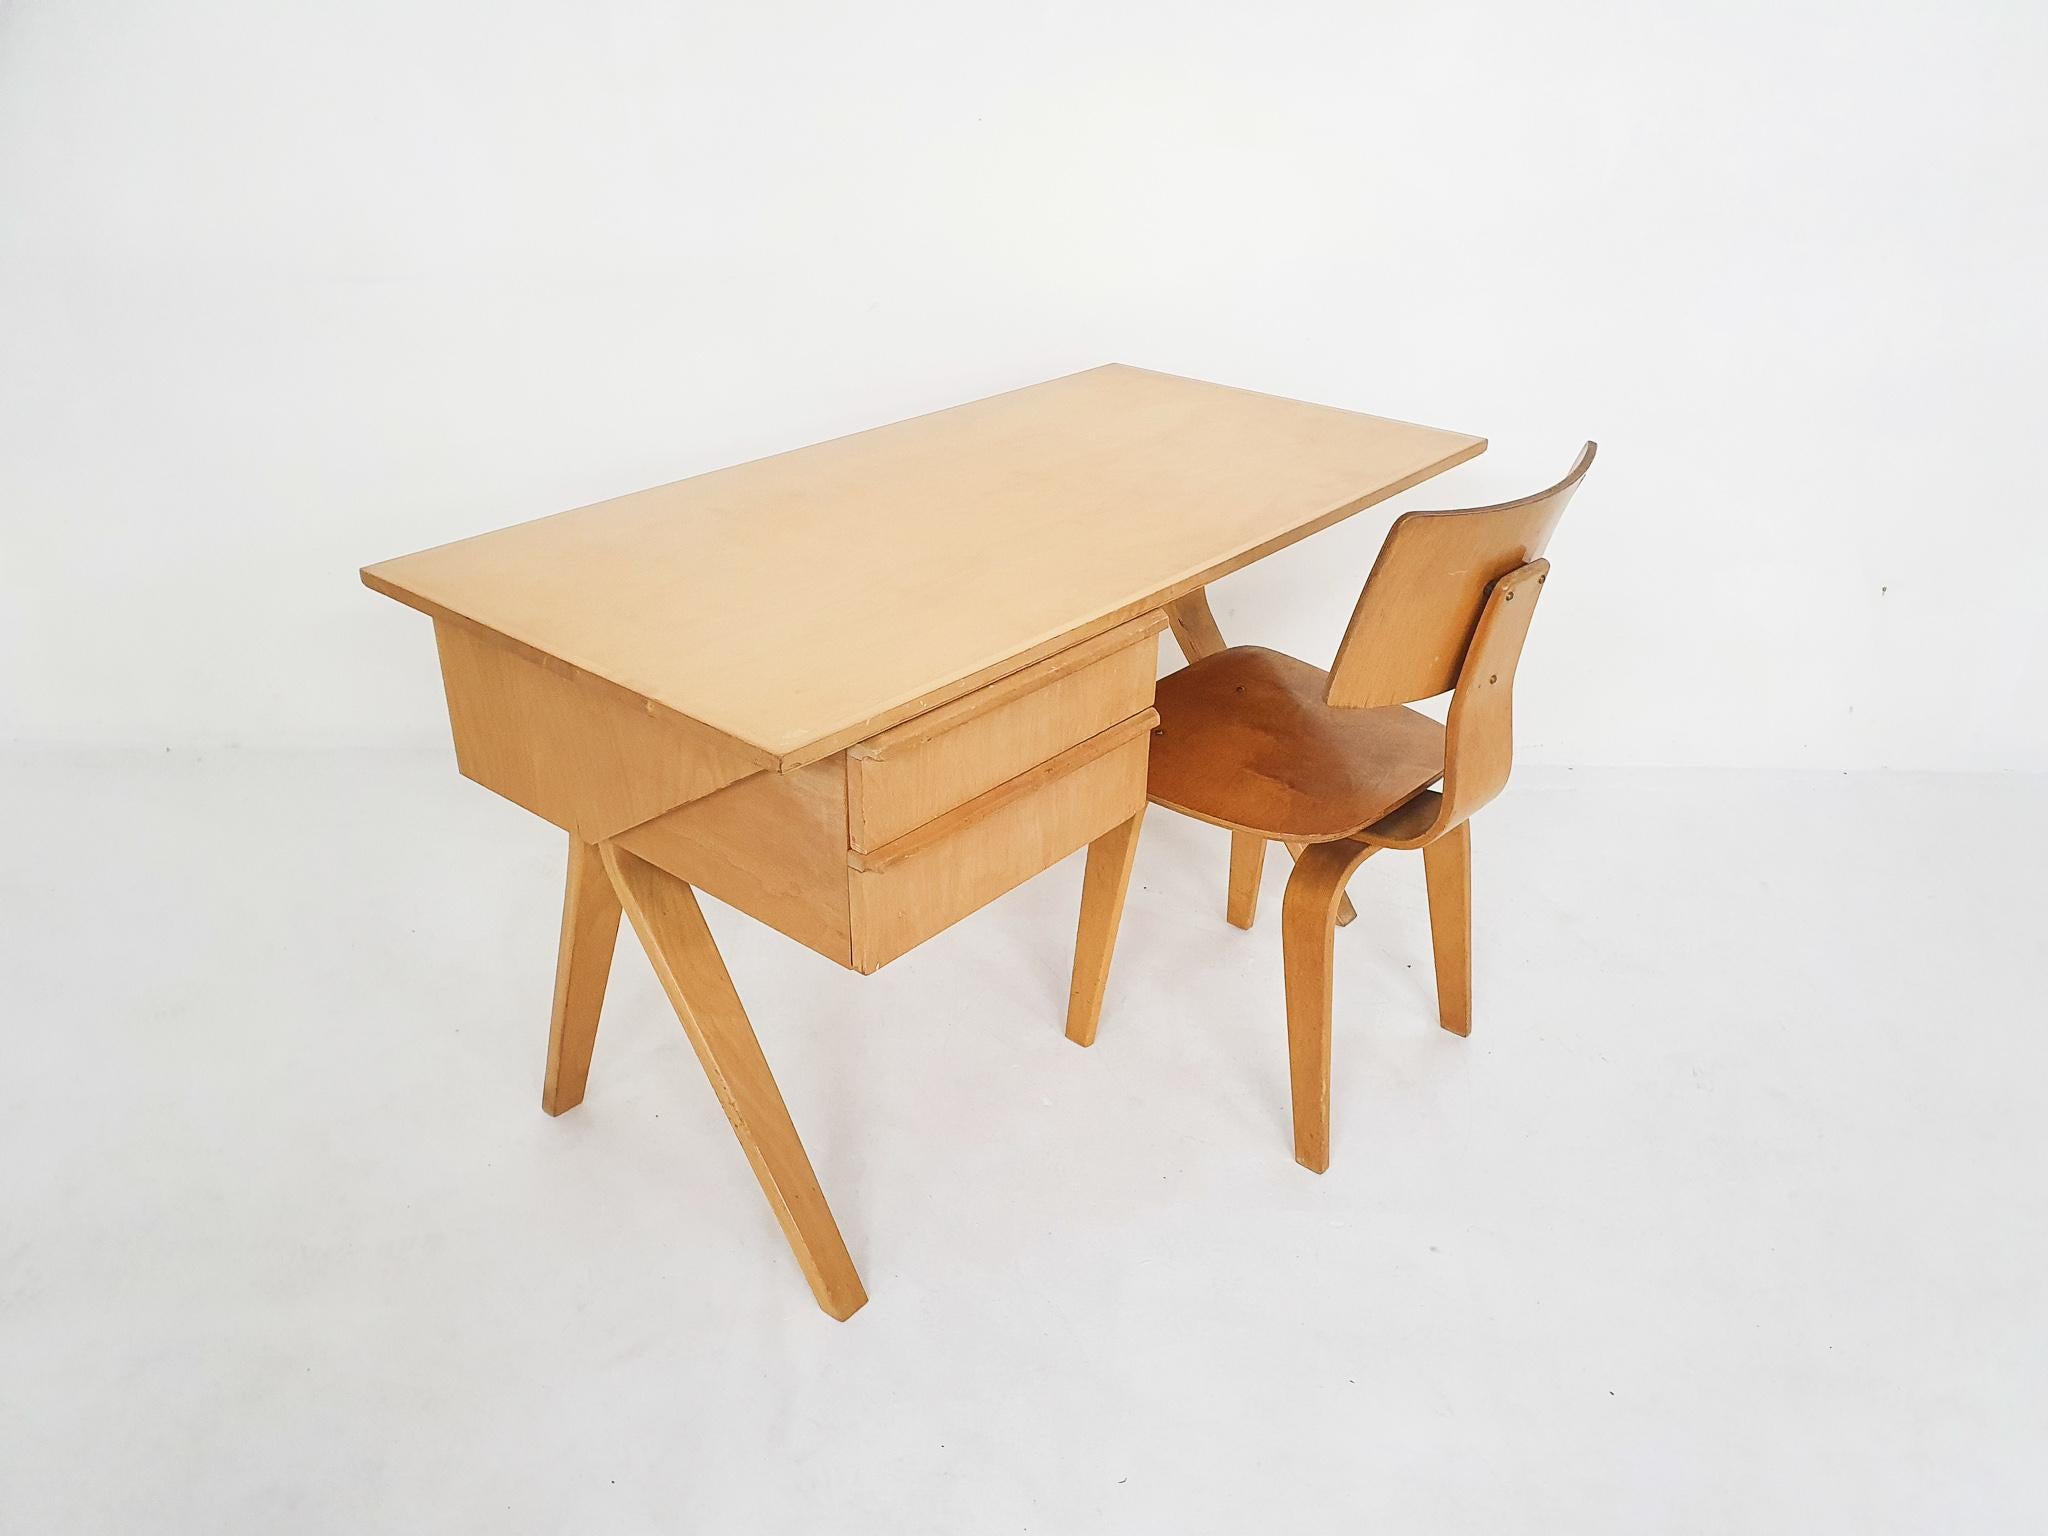 Birch desk with plywood legs. Designed by Cees Braakman for Pastoe.
The top is in very good original condition, since the formar owners had a protection glass on top of the desk.
Desk comes with matching chair.

Cees Braakman was a Dutch